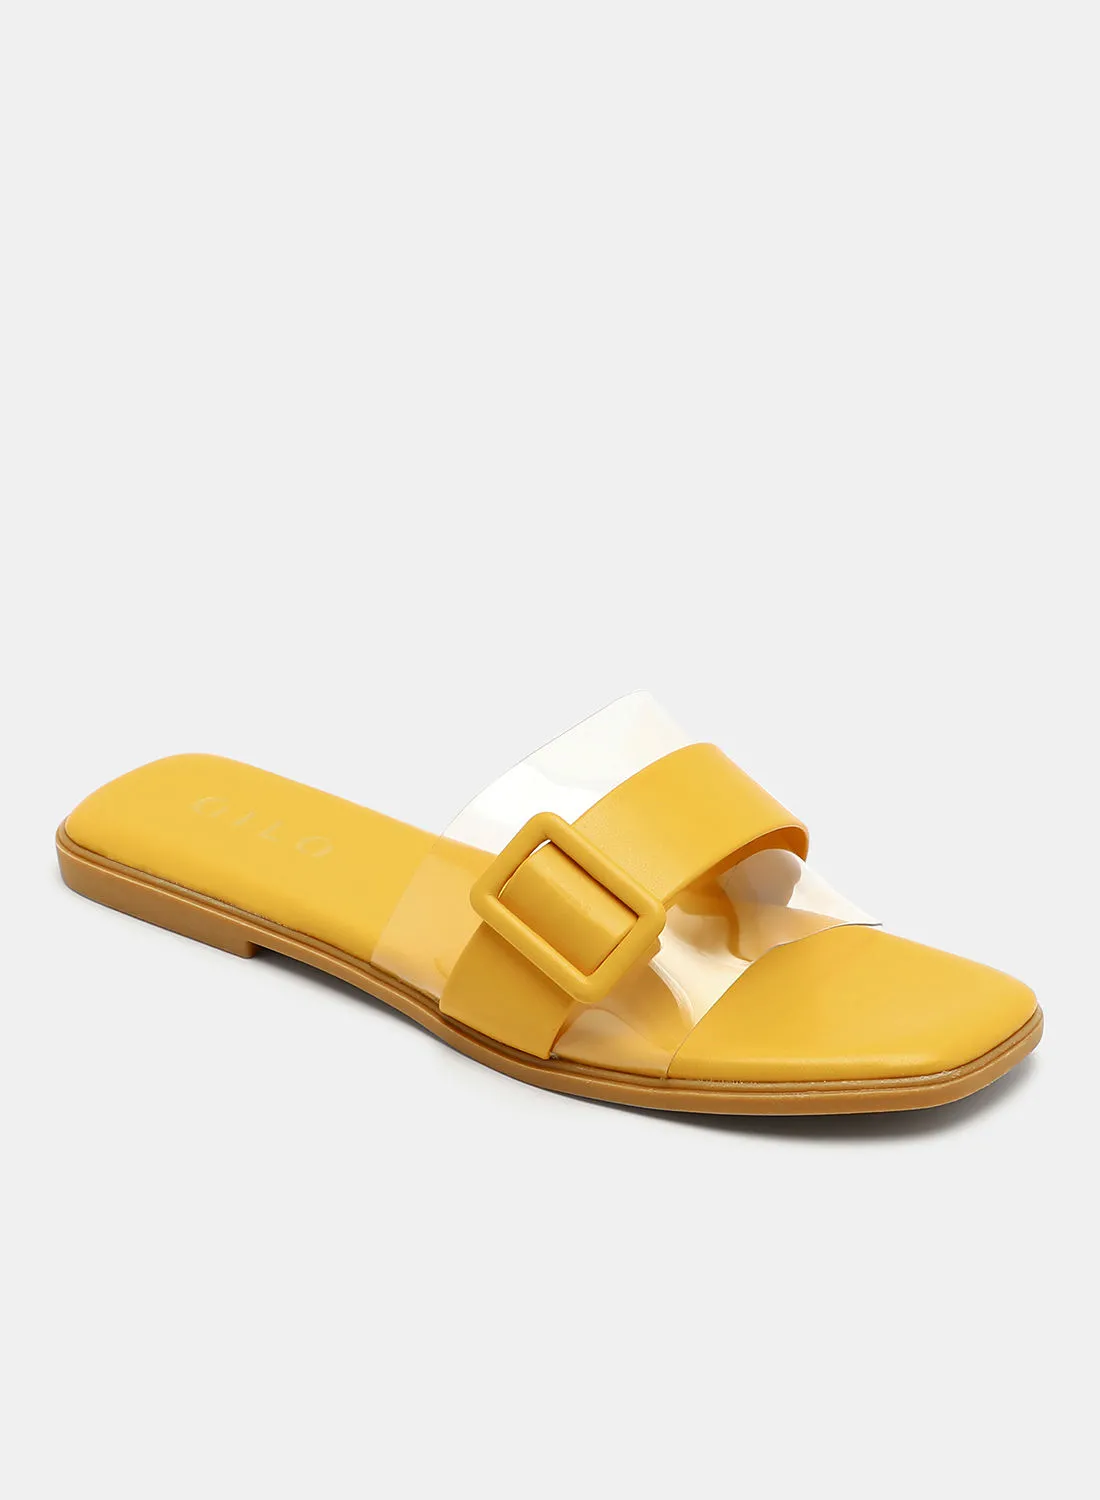 Aila Slip-On Casual Flat Sandals Yellow